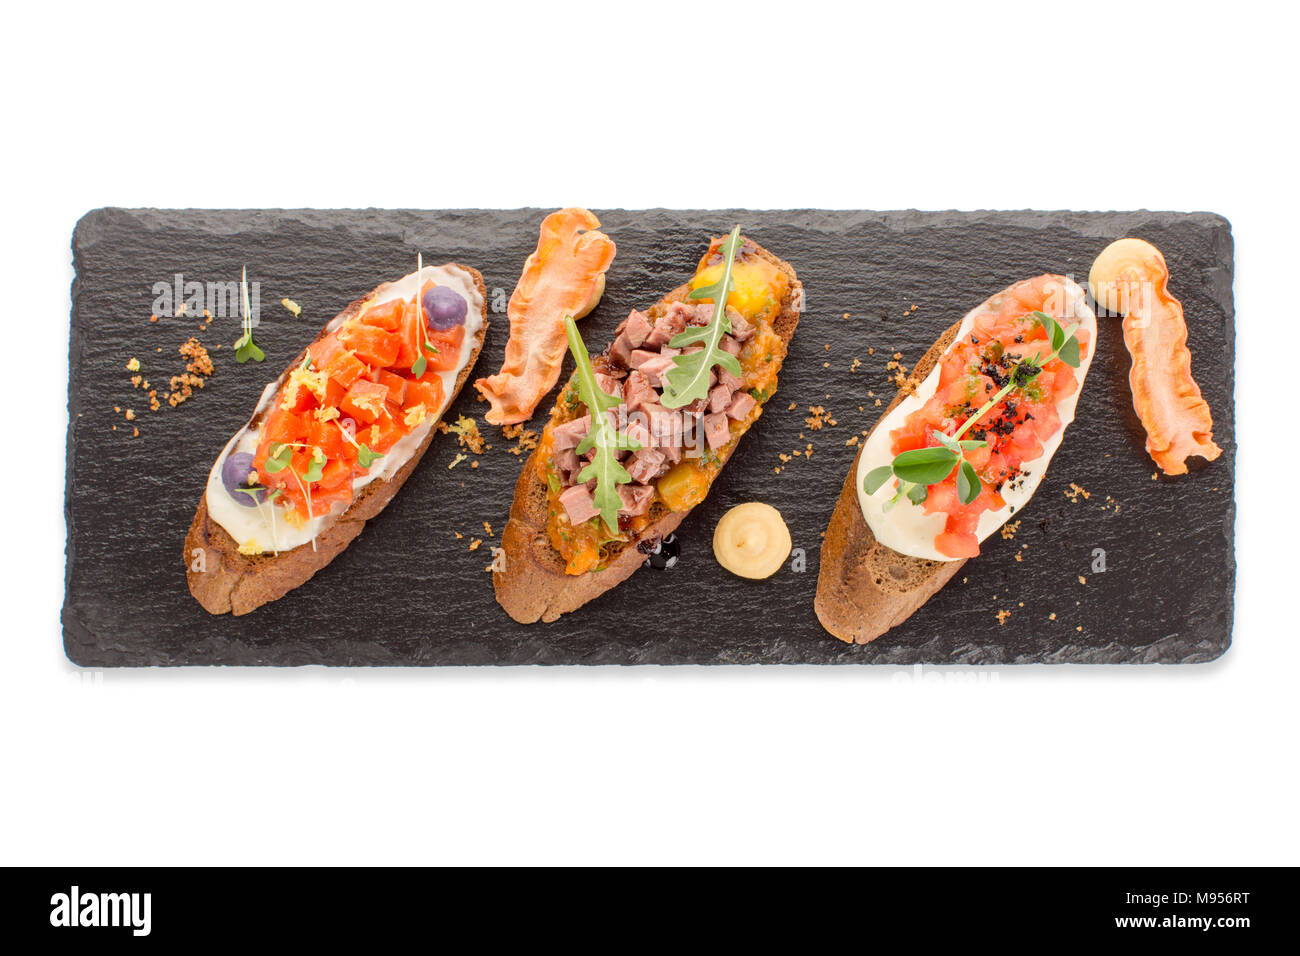 Three types of appetizers on an isolated board Stock Photo